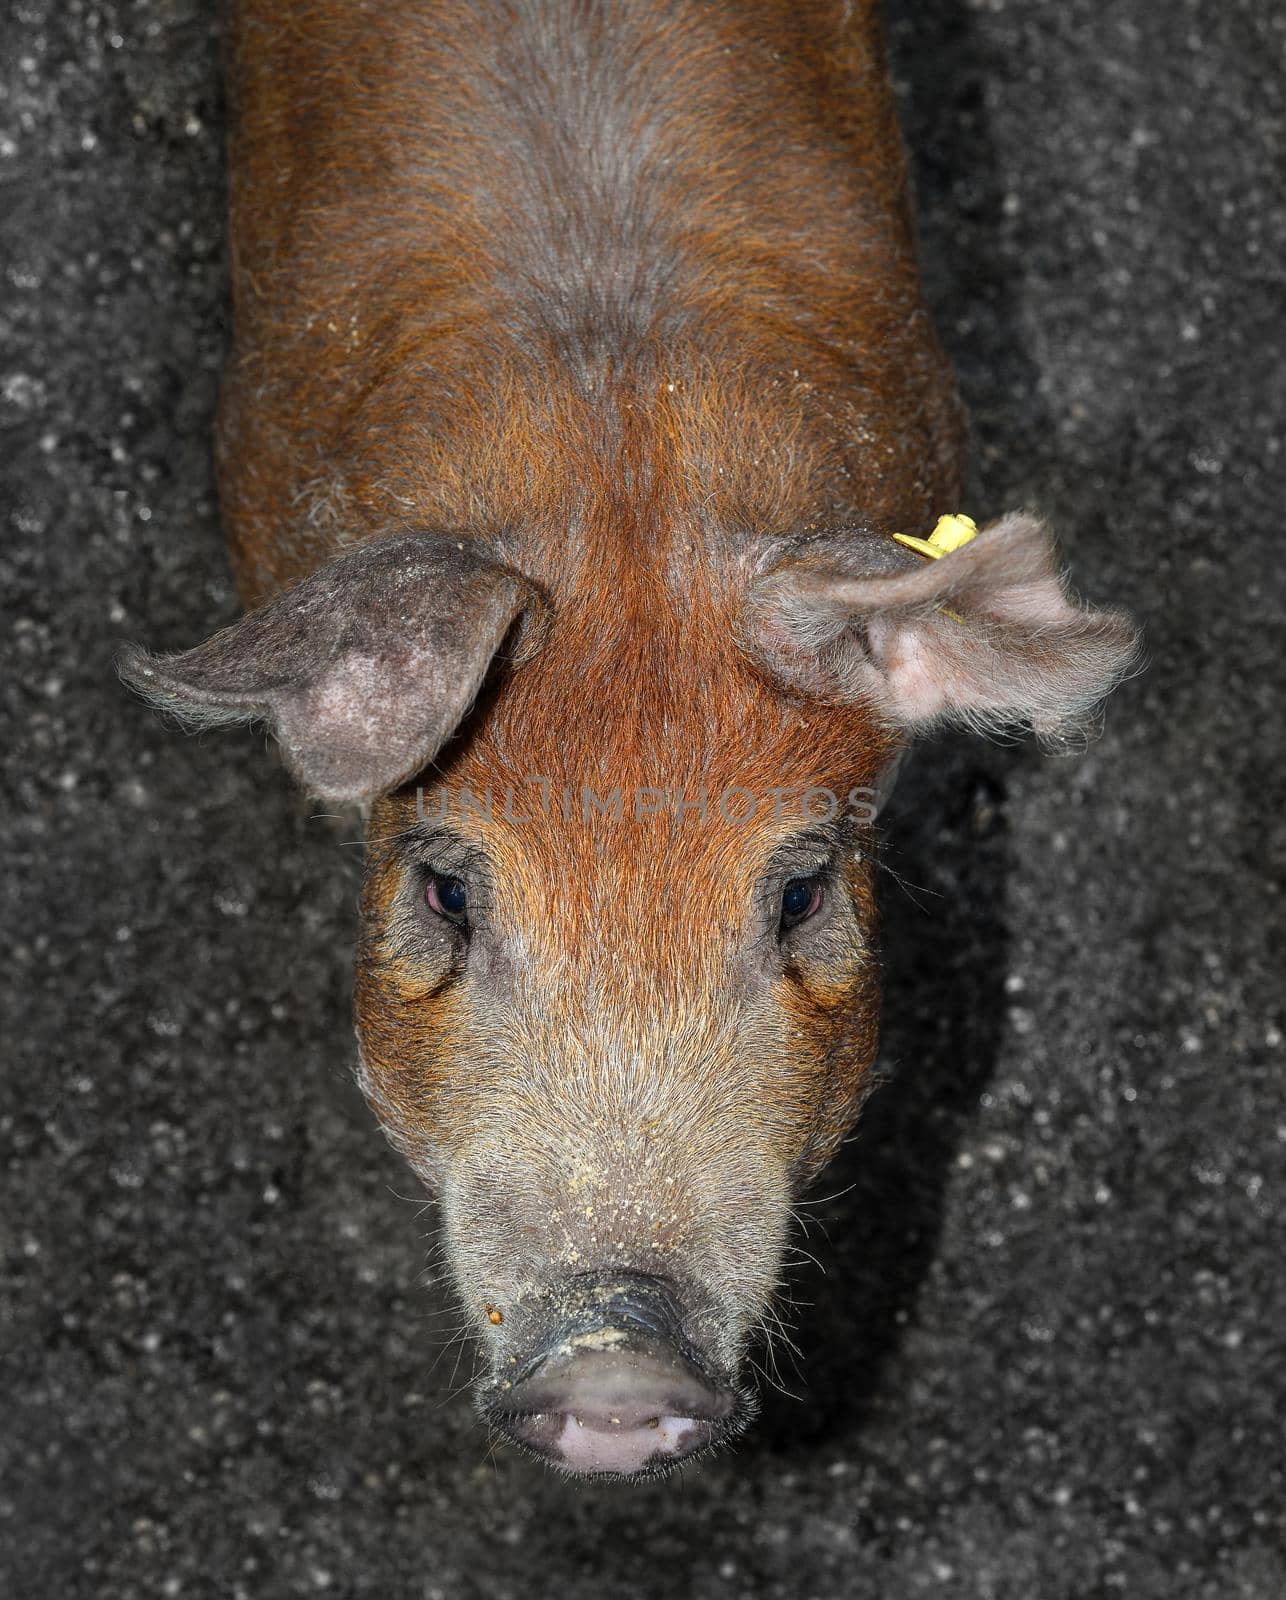 Pig portrait close up. Funny red fluffy pig looking into camera, Farm animals